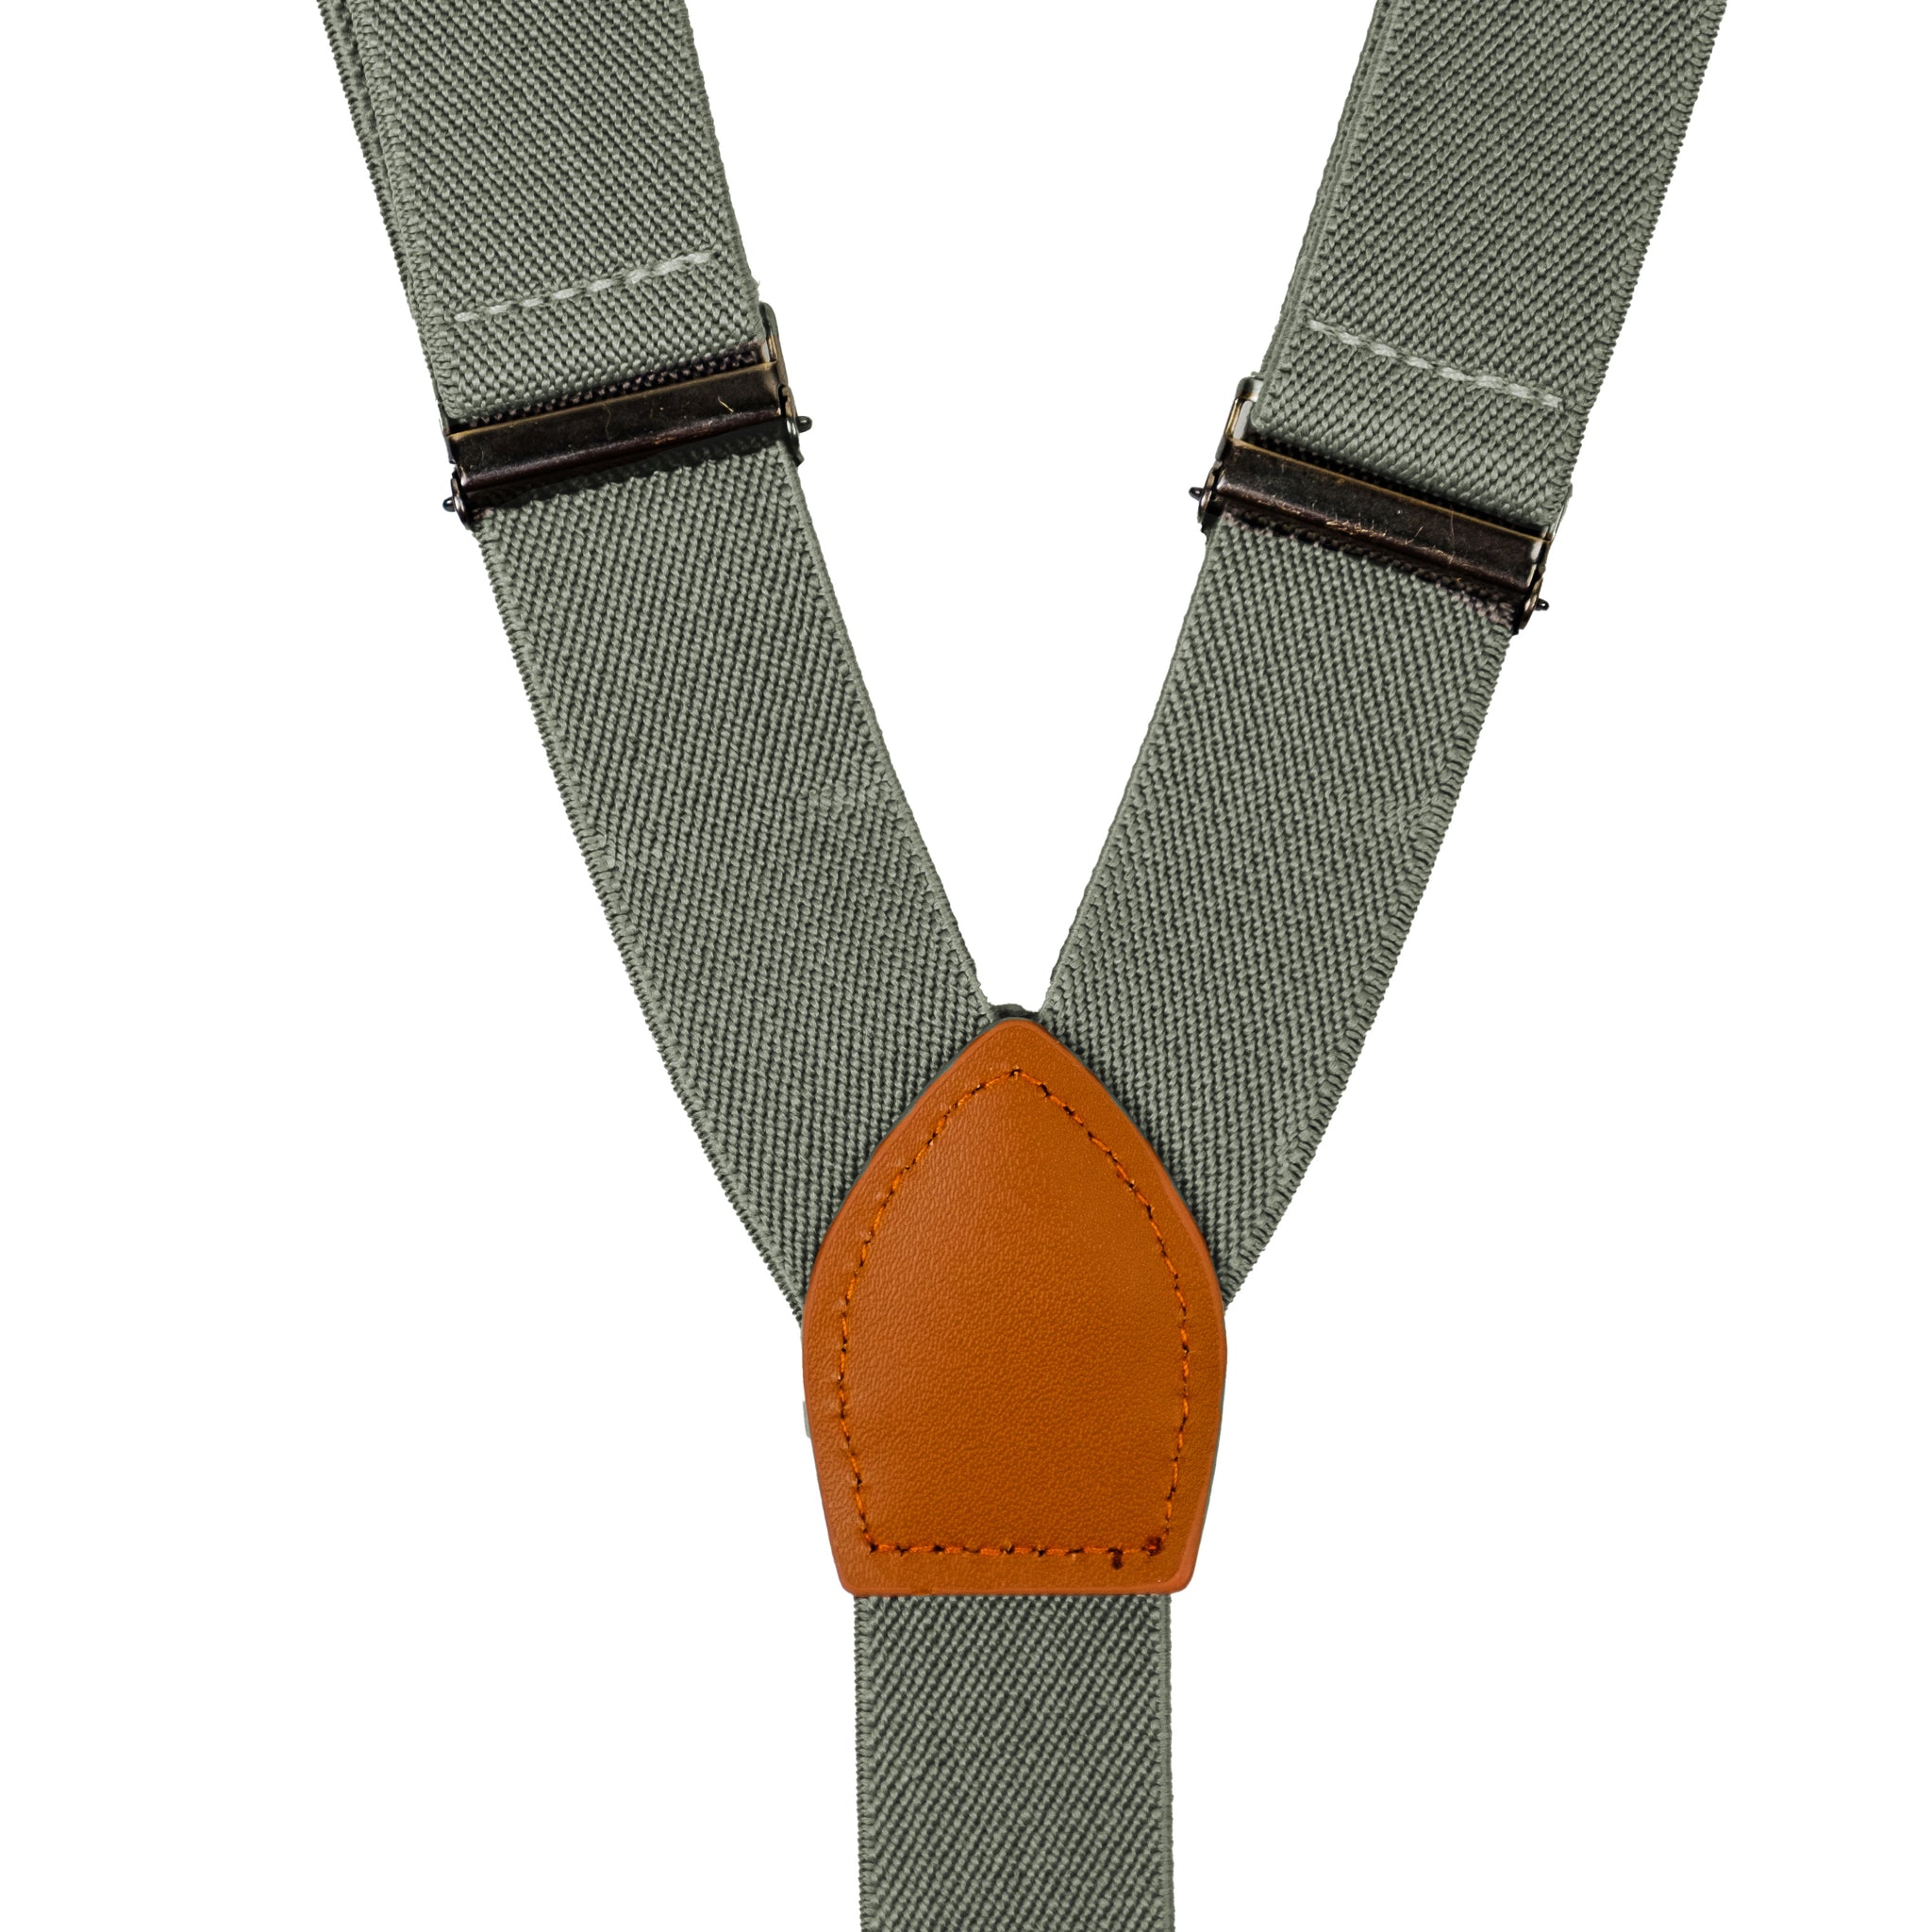 Chokore Y-shaped Suspenders with Leather detailing and adjustable Elastic Strap (Lichen)